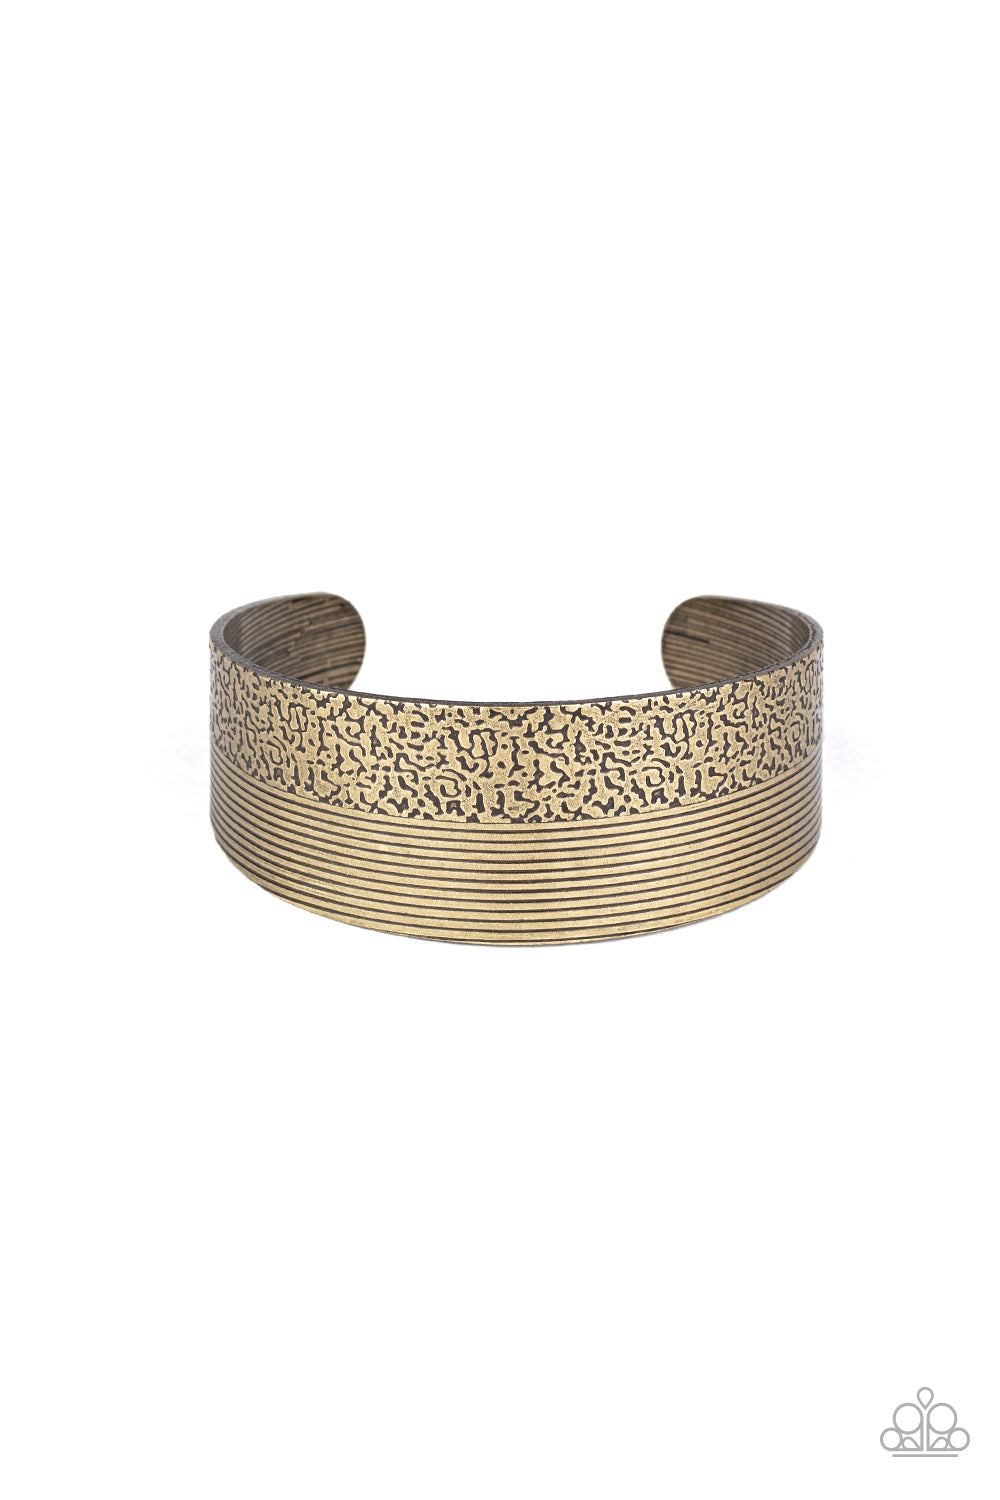 Mixed Vibes - Brass Cuff Bracelet - Paparazzi Accessories - One half of a thick brass cuff is engraved in stacked linear lines while the other half is hammered in a row of tactile textures, creating a collision of texture around the wrist. Sold as one individual bracelet.